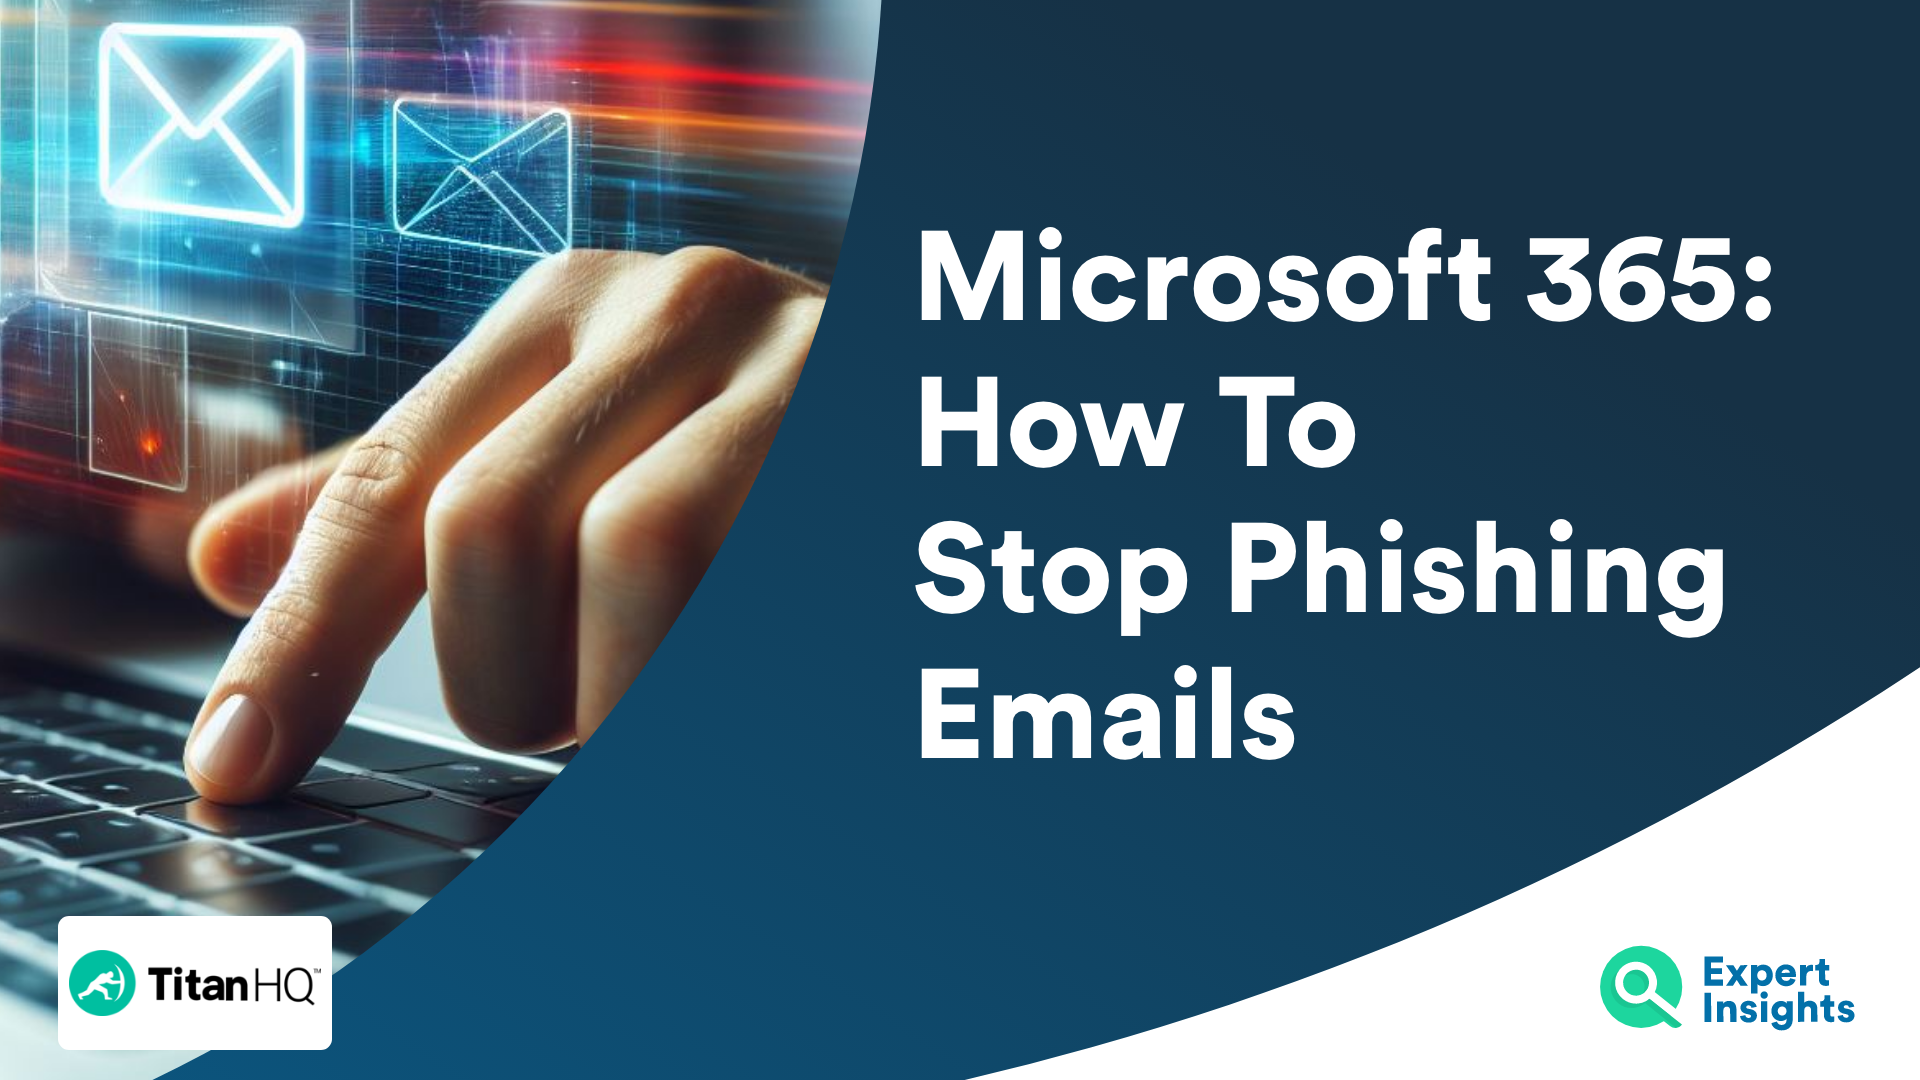 Microsoft 365: How To Stop Phishing Emails